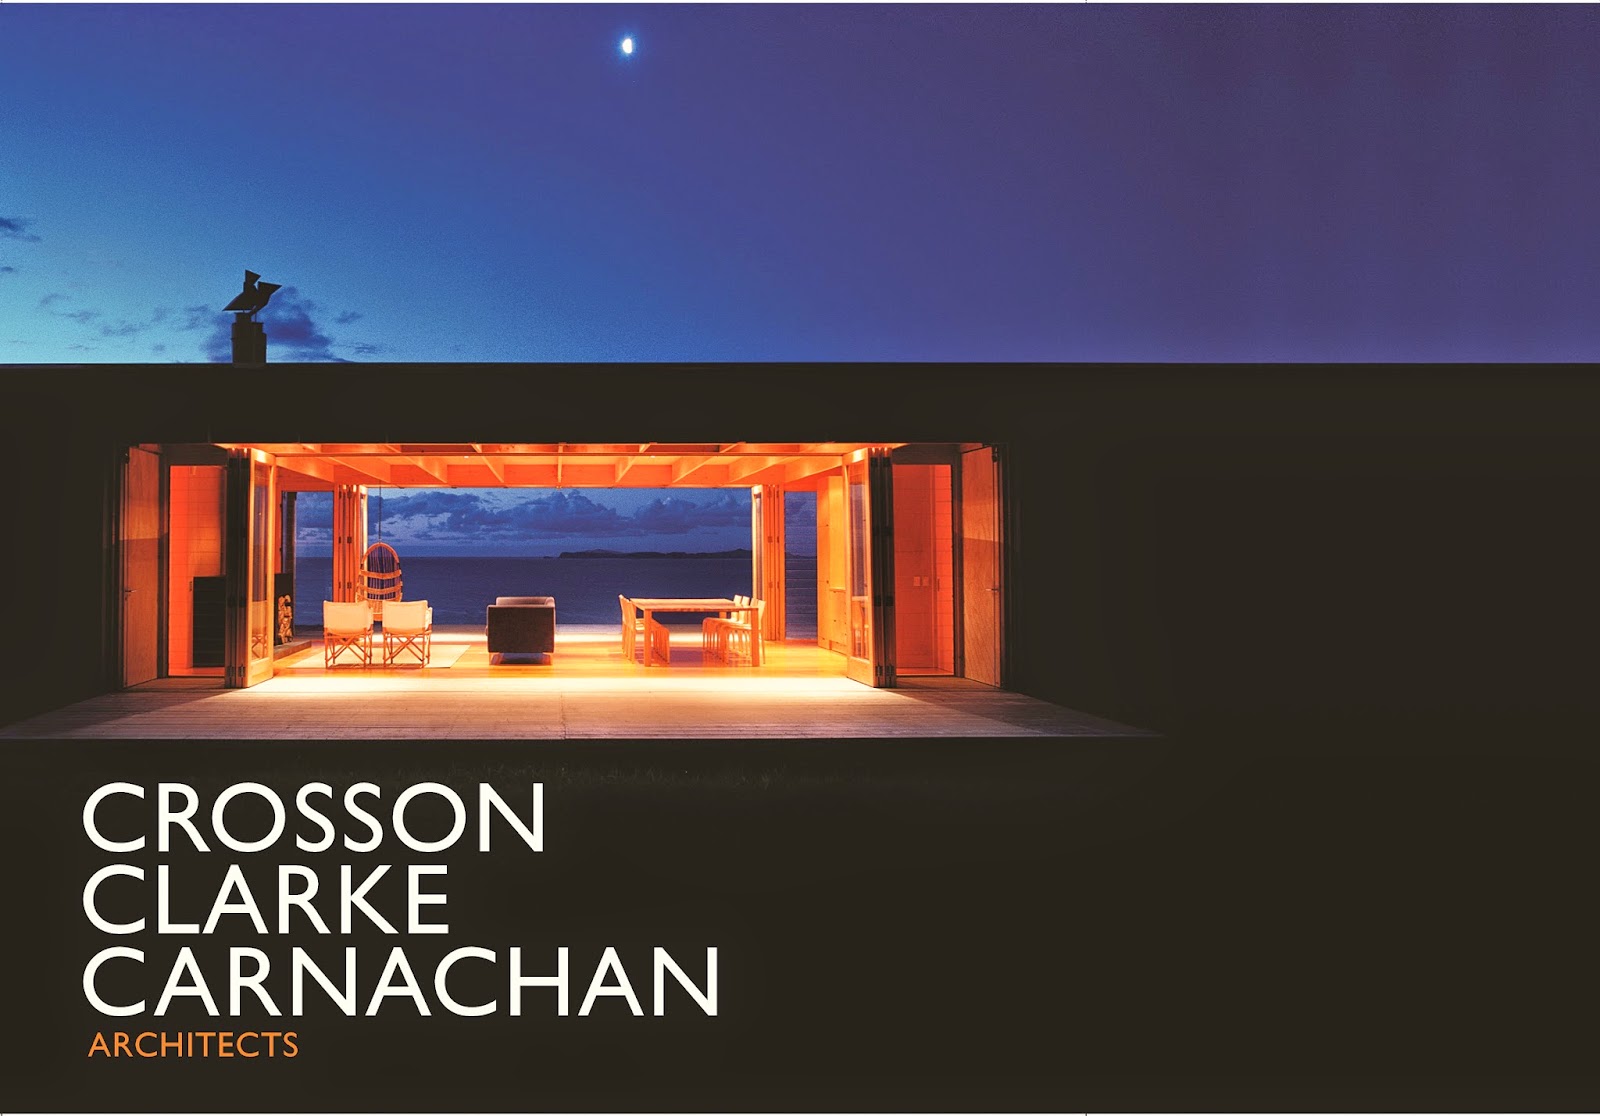 http://www.pageandblackmore.co.nz/products/828960?barcode=9780473262983&title=CrossonClarkeCarnachanArchitects